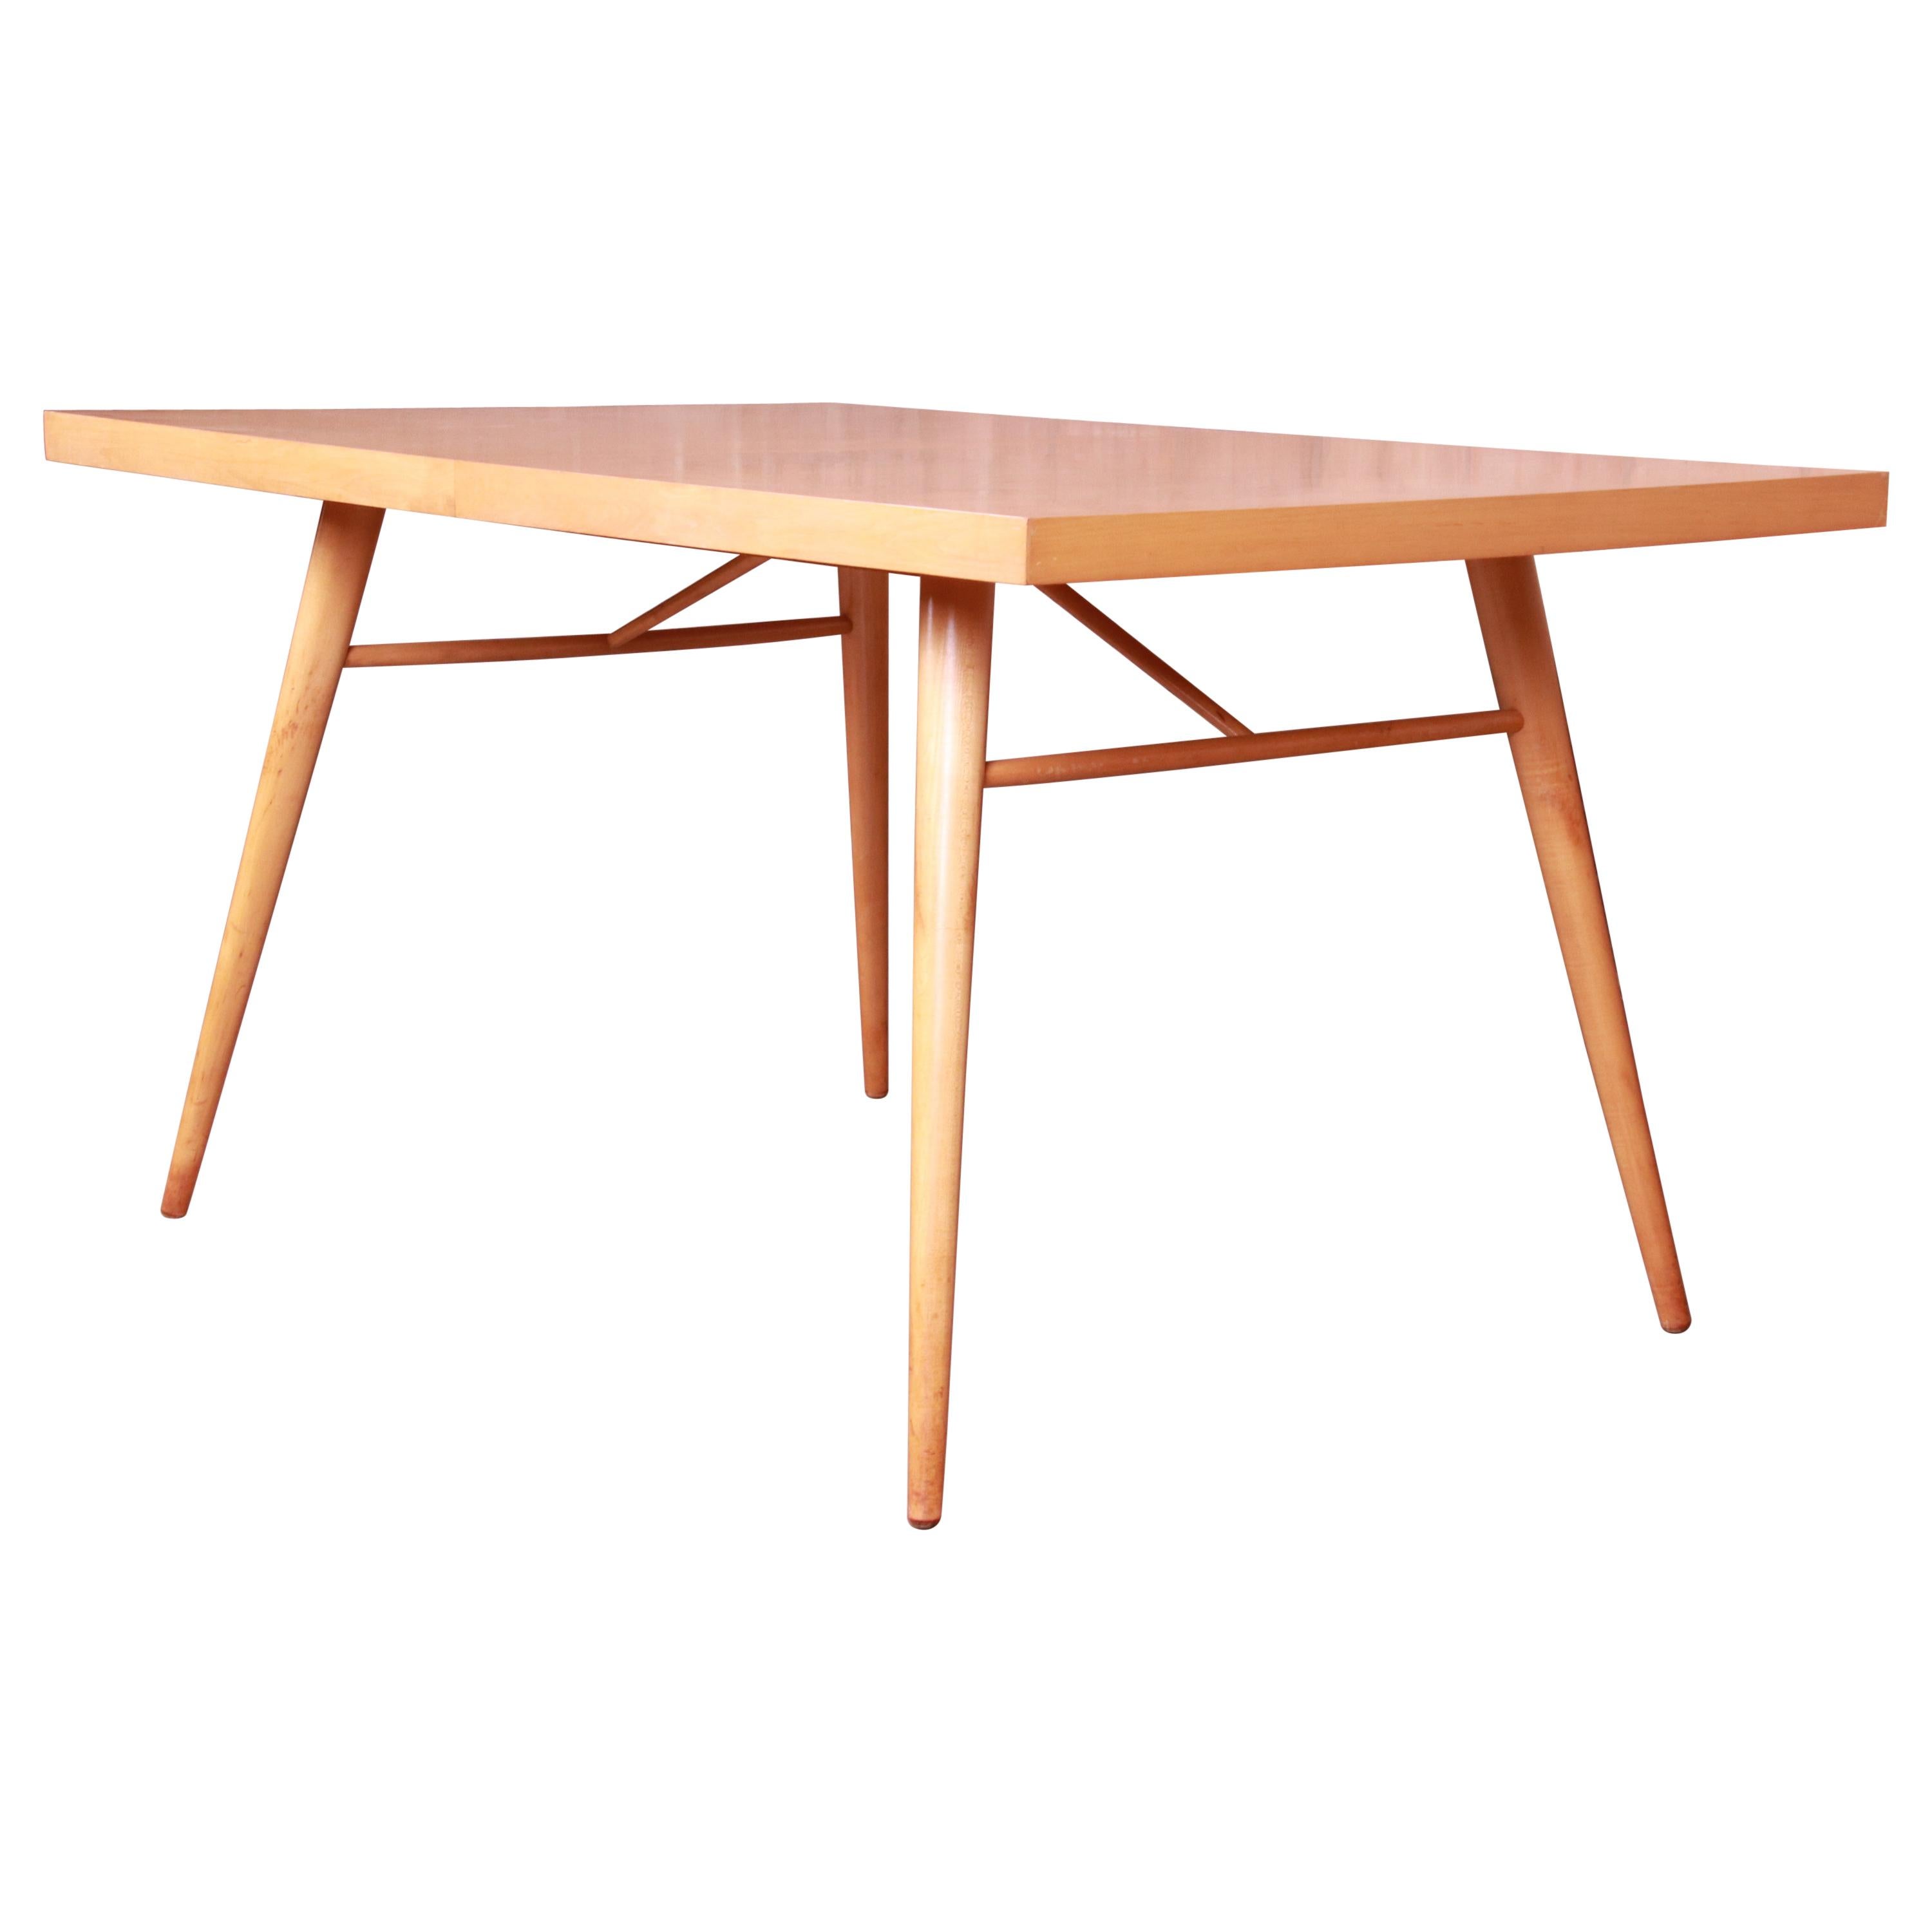 Paul McCobb Planner Group Mid-Century Modern Maple Extension Dining Table, 1950s